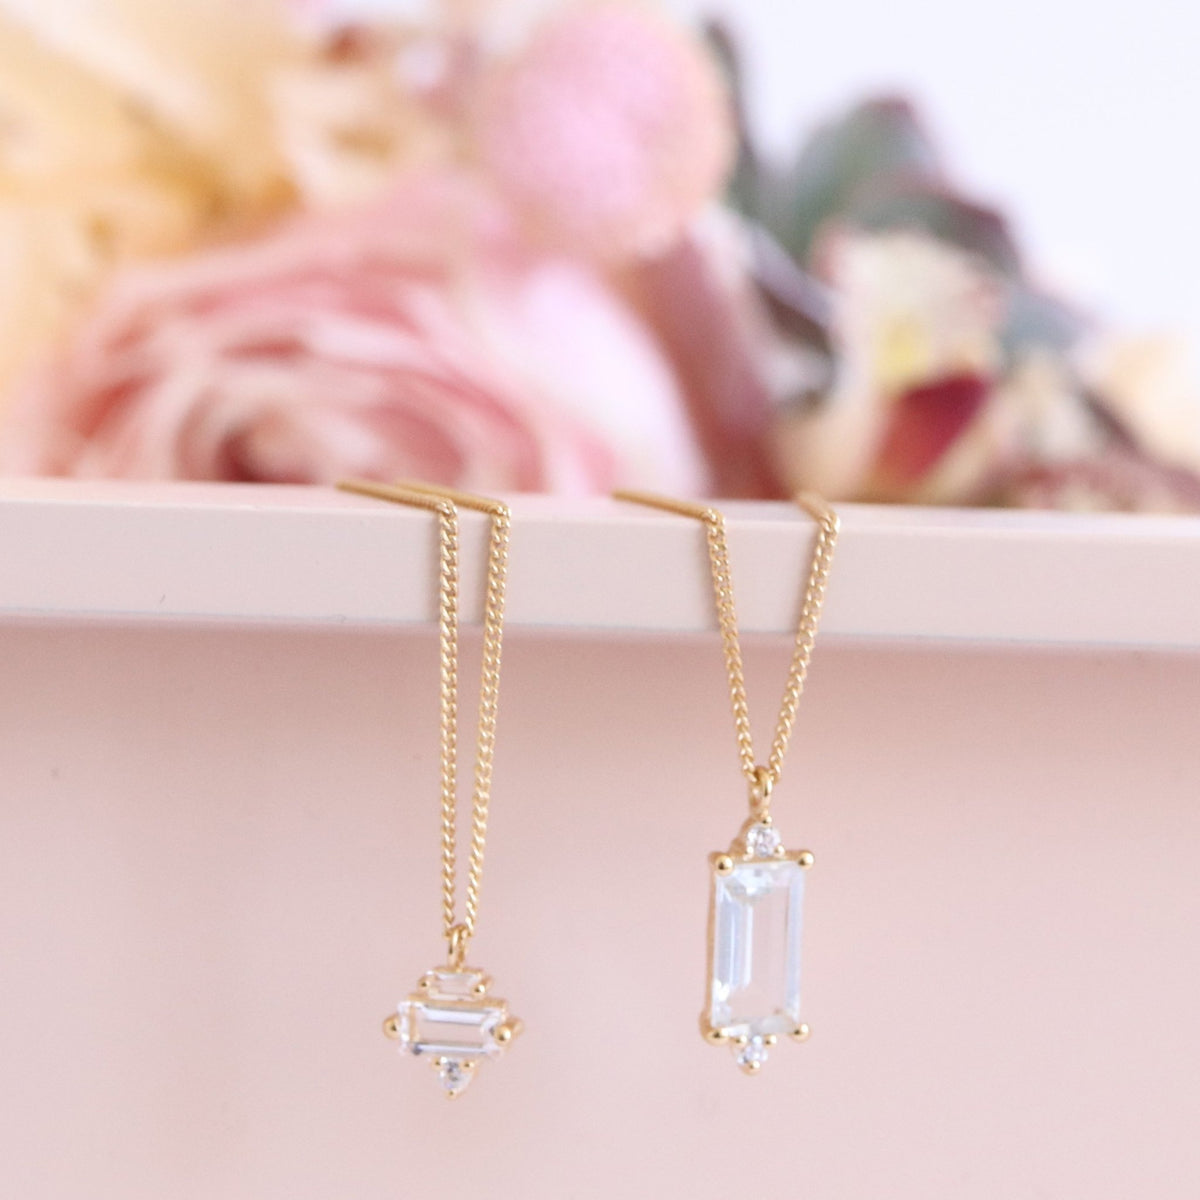 Loyal Drop Necklace - White Topaz, Cubic Zirconia &amp; Gold - SO PRETTY CARA COTTER